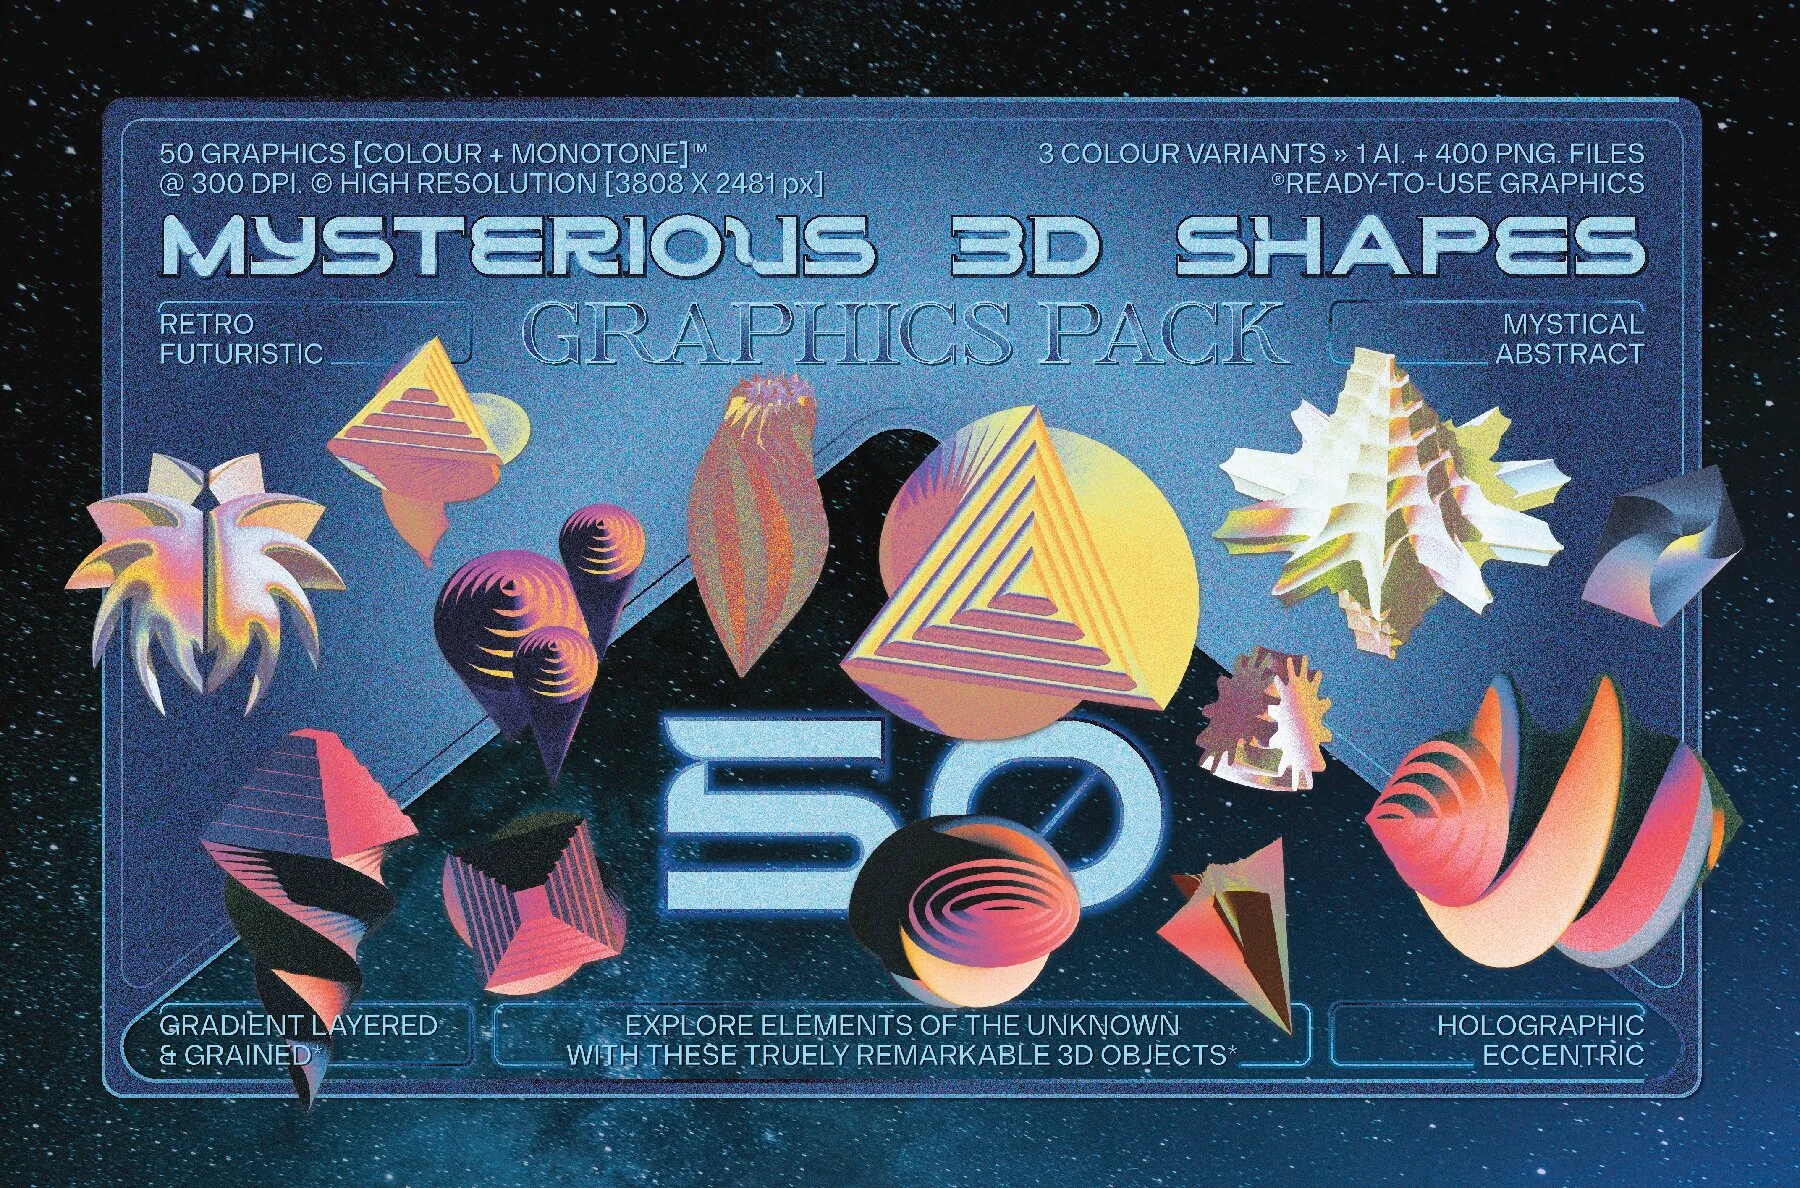 Mysterious 3D Shapes Graphics Pack